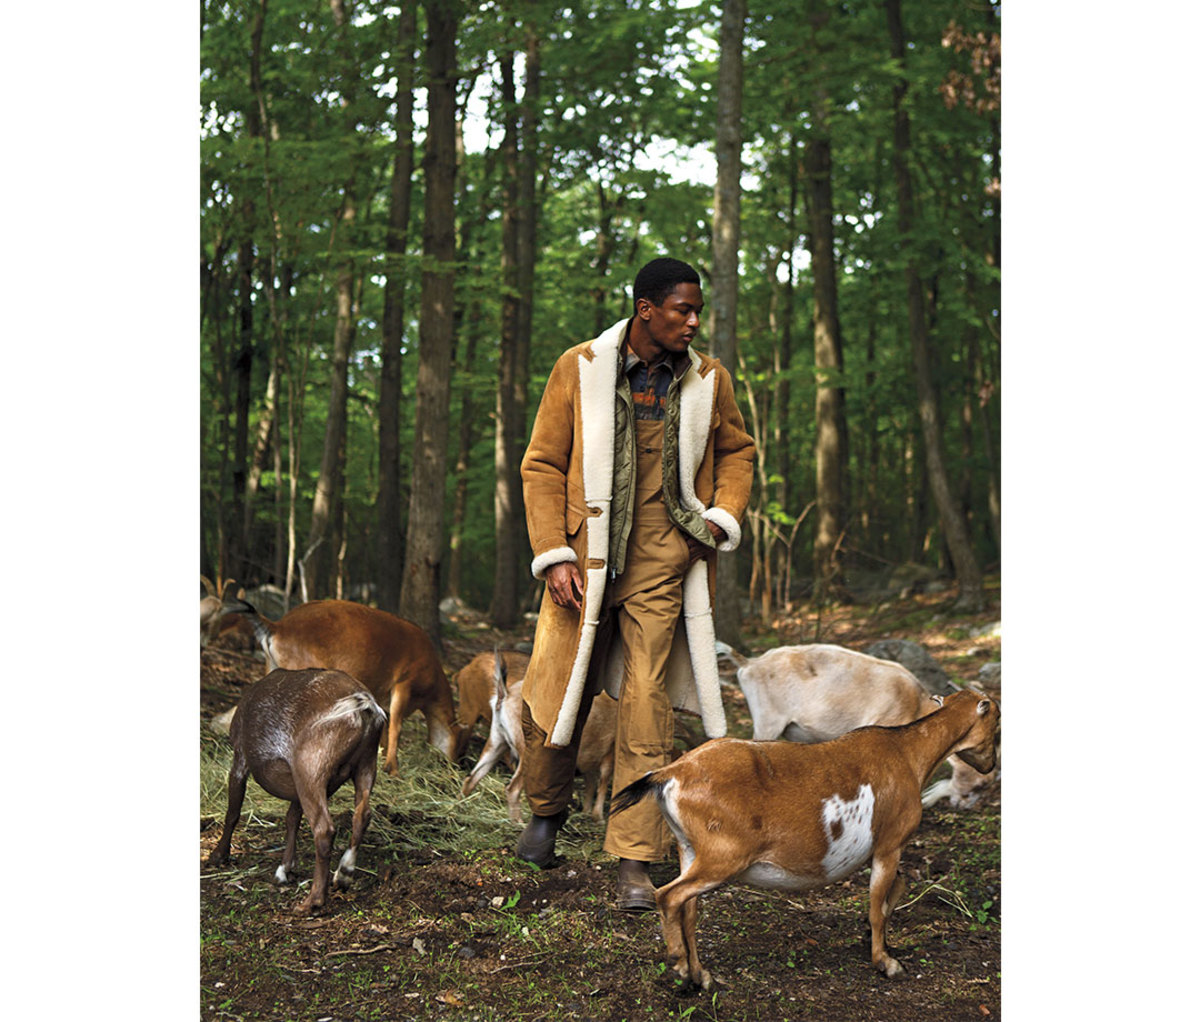 Black man wearing shearling coat in forest with goats